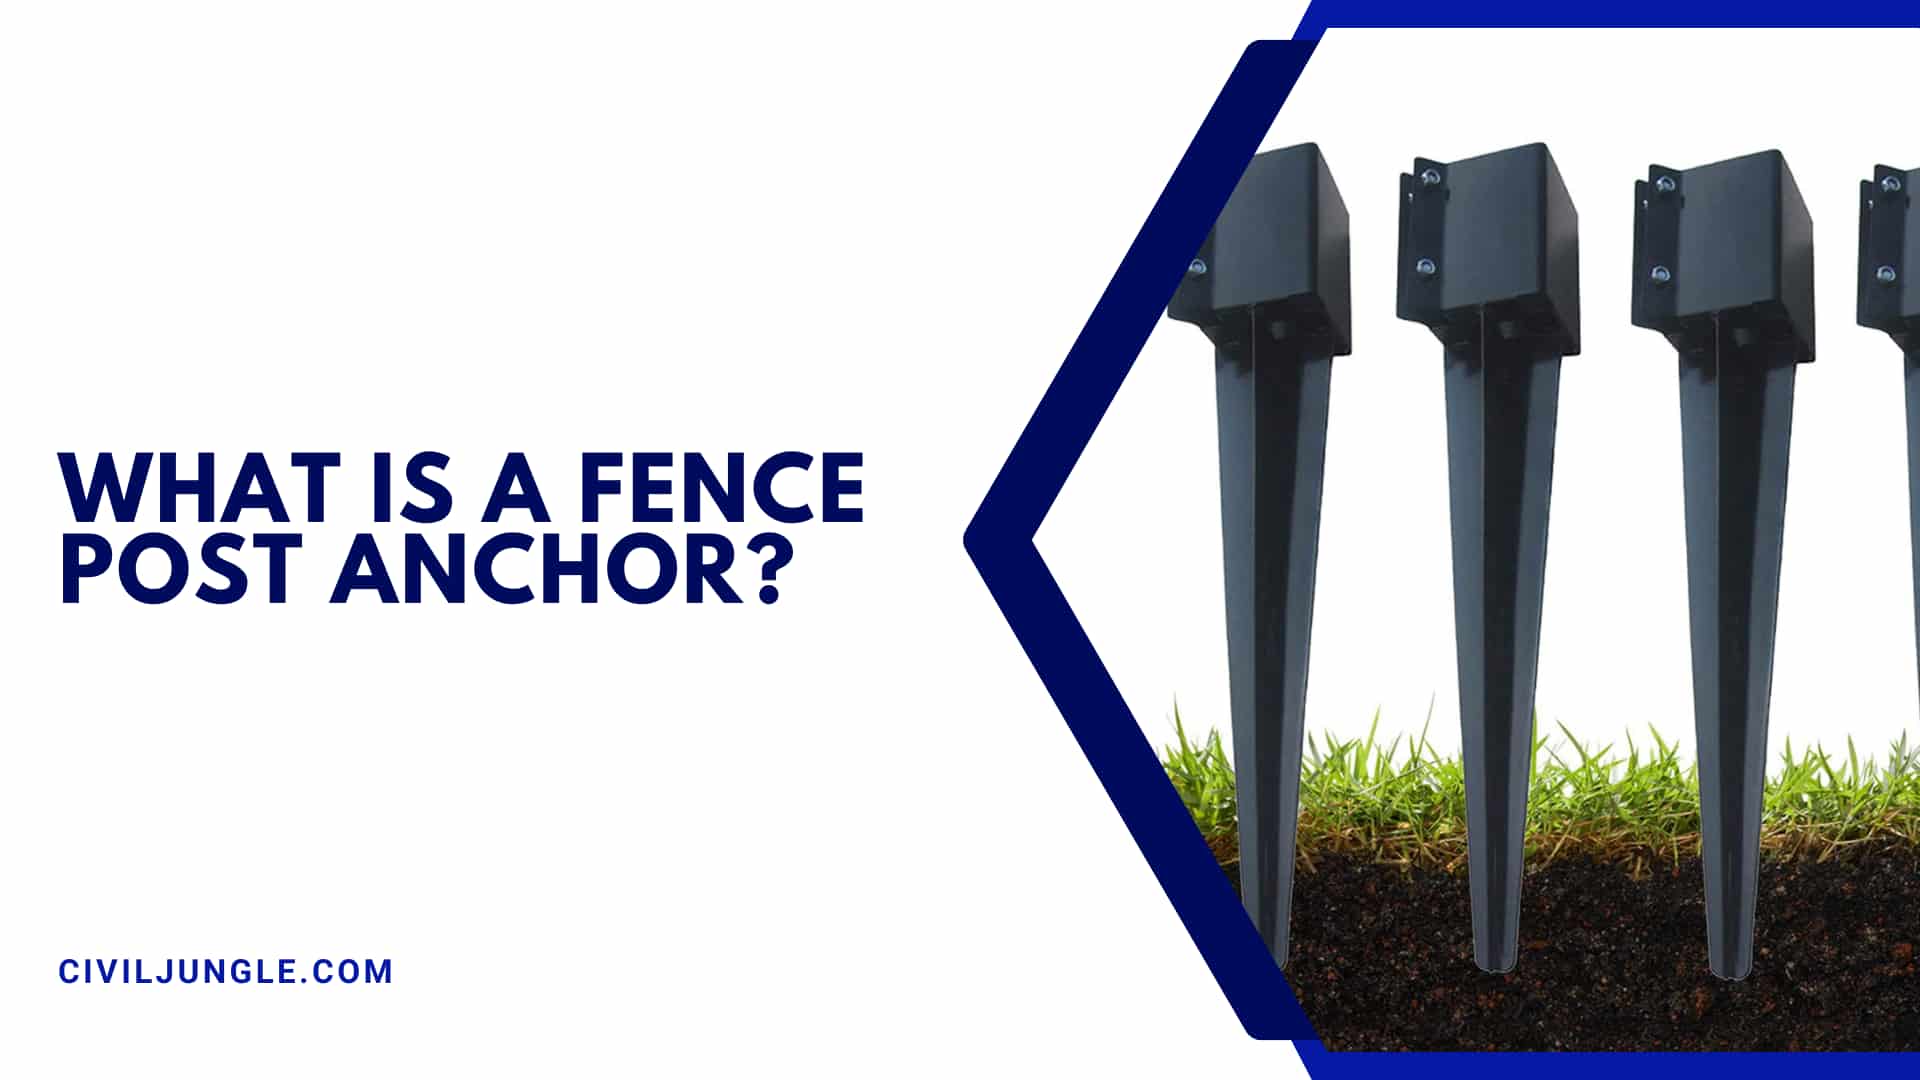 What Is a Fence Post Anchor?